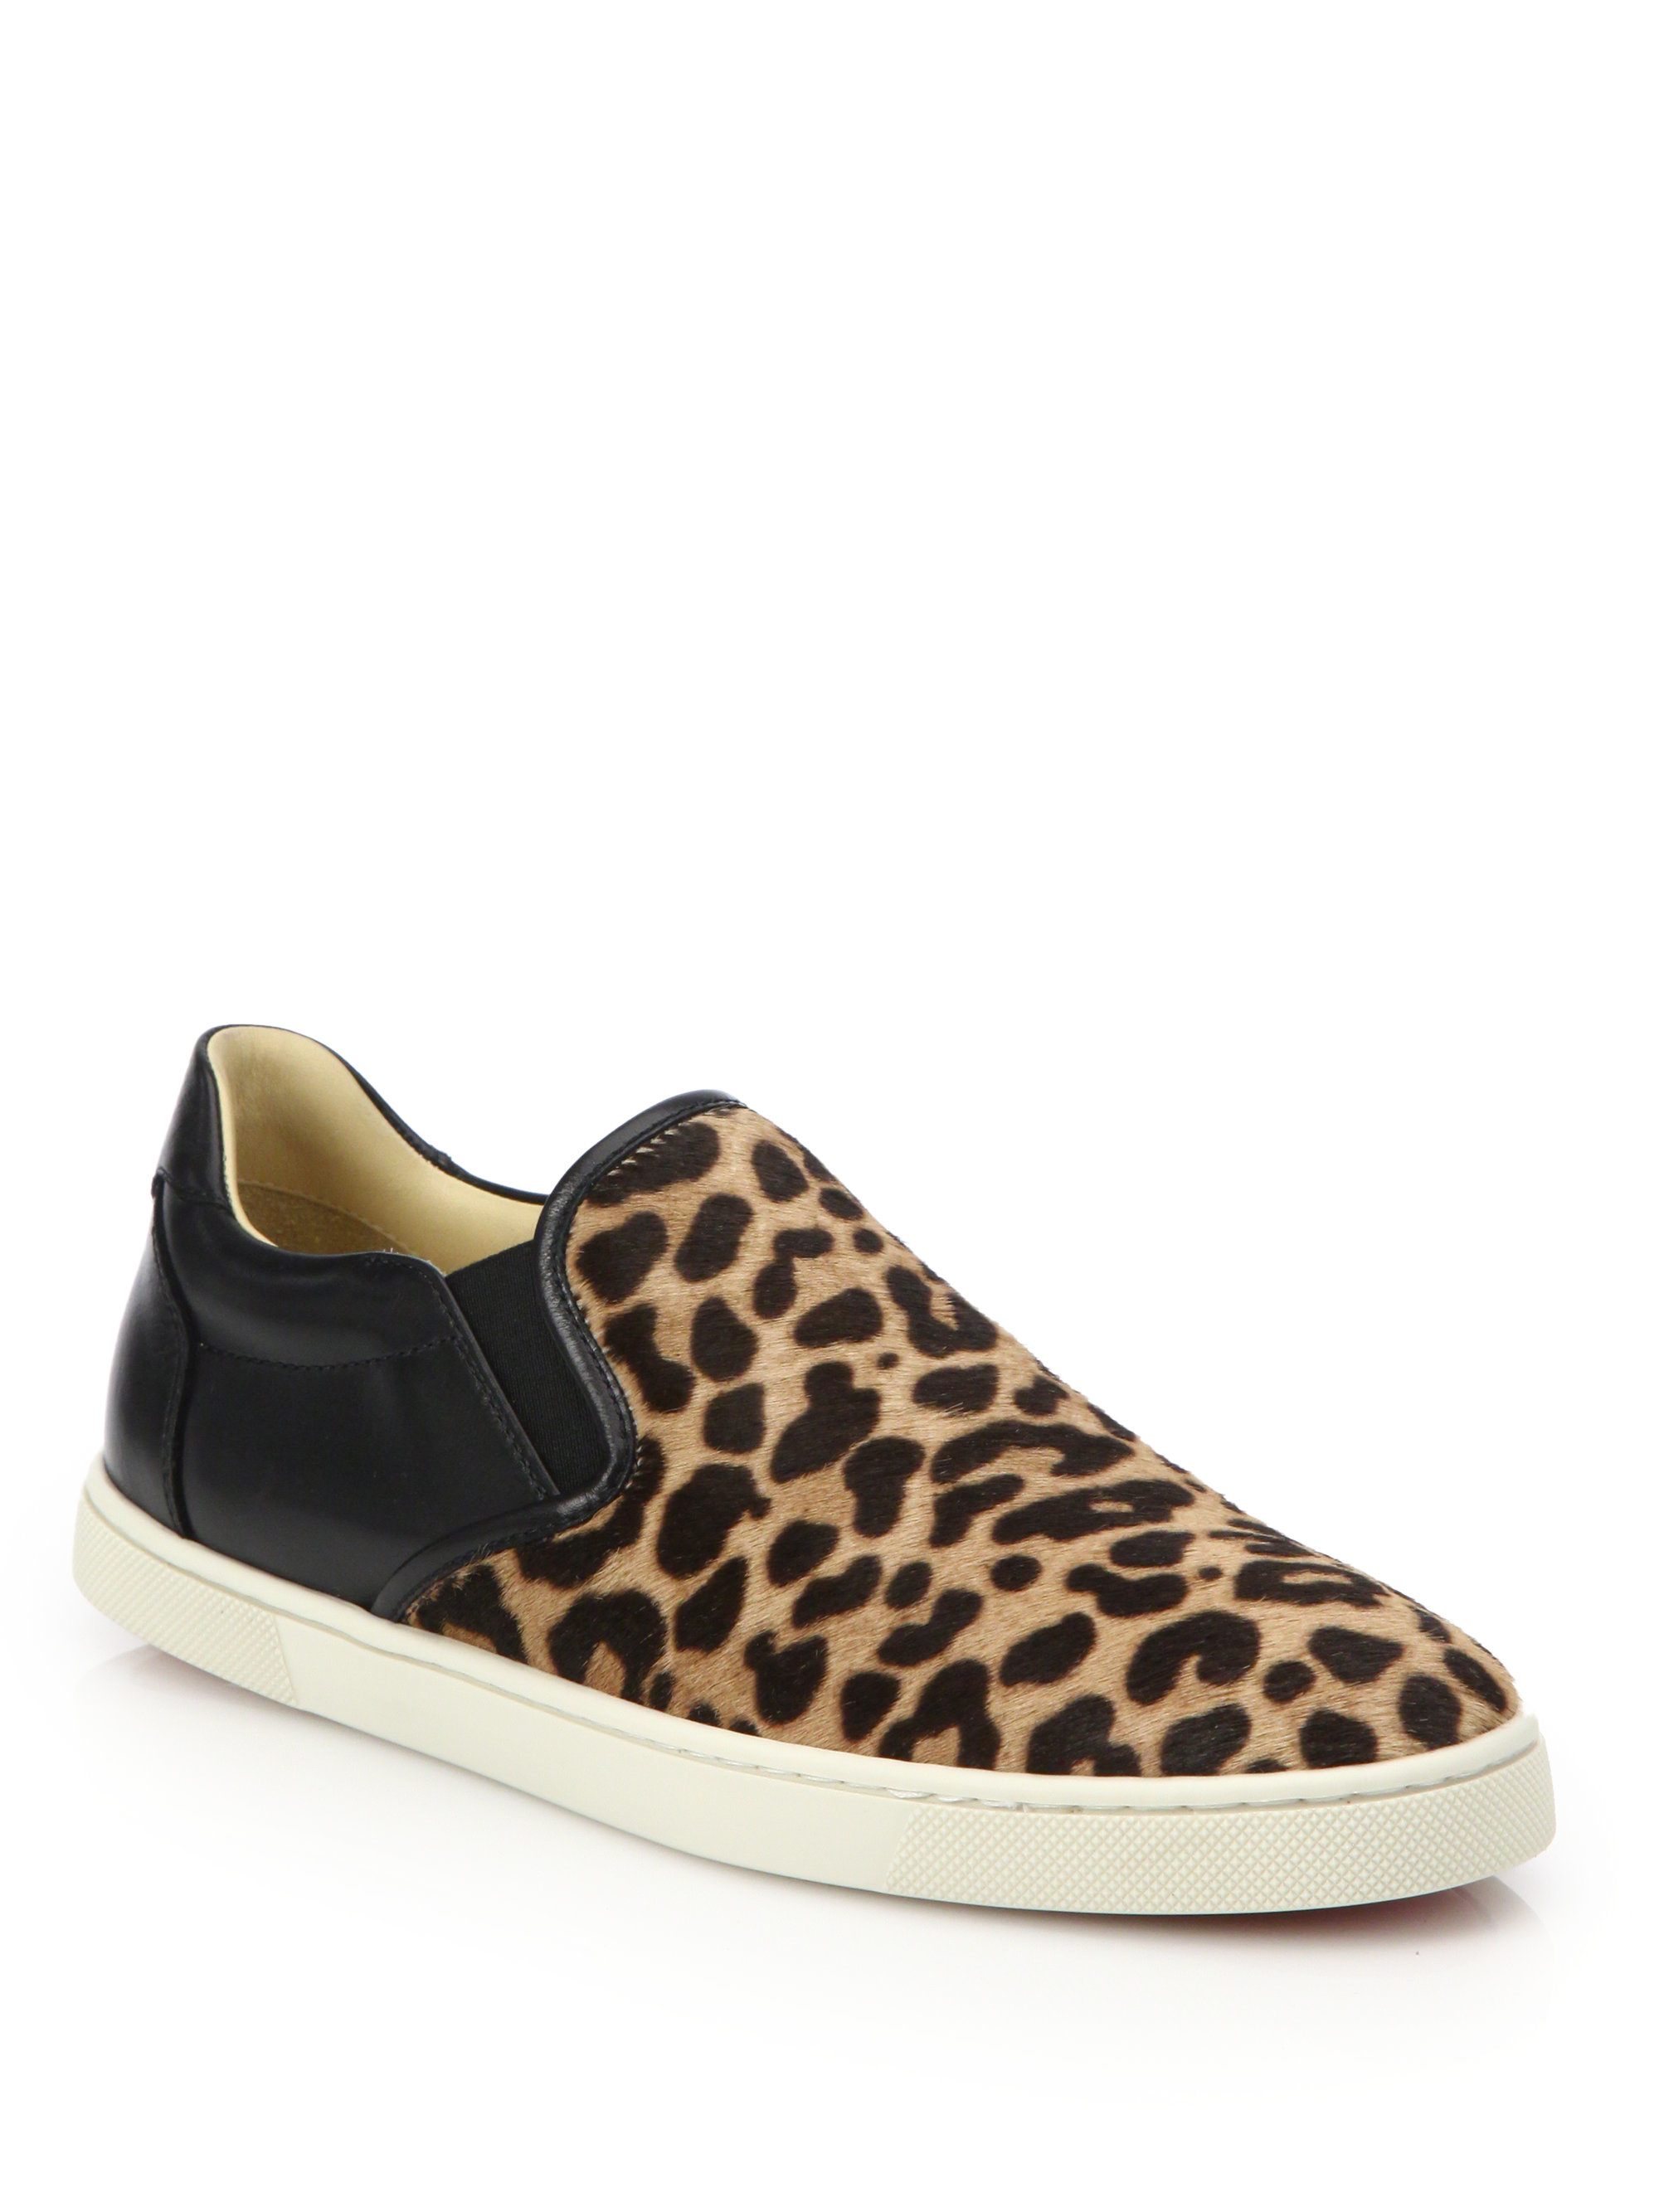 Christian Louboutin Master Key Leopard-print & Leather Sneakers | Lyst